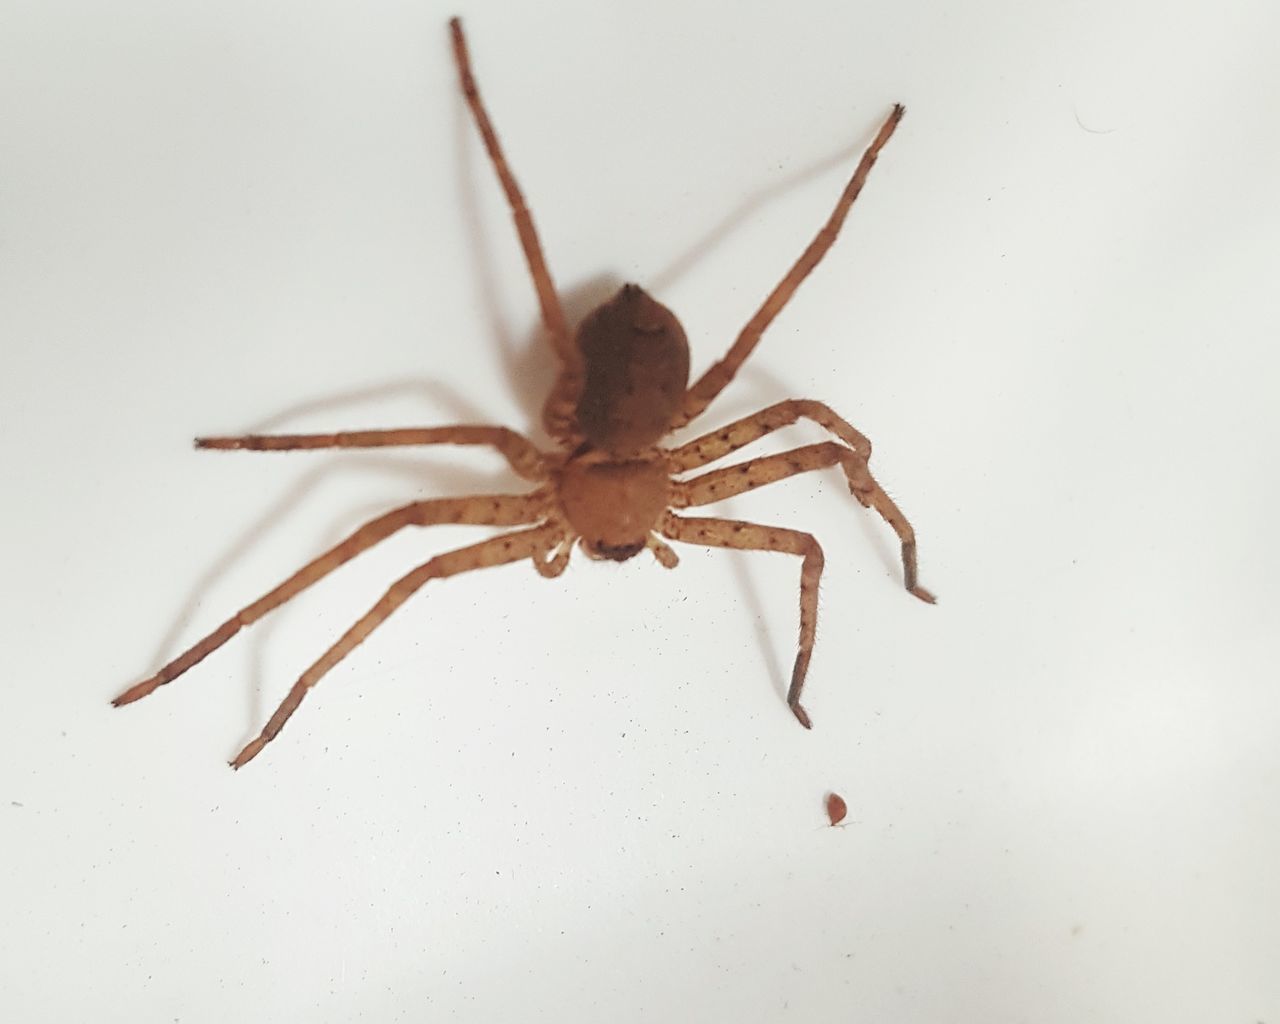 CLOSE-UP OF SPIDER AND WHITE BACKGROUND